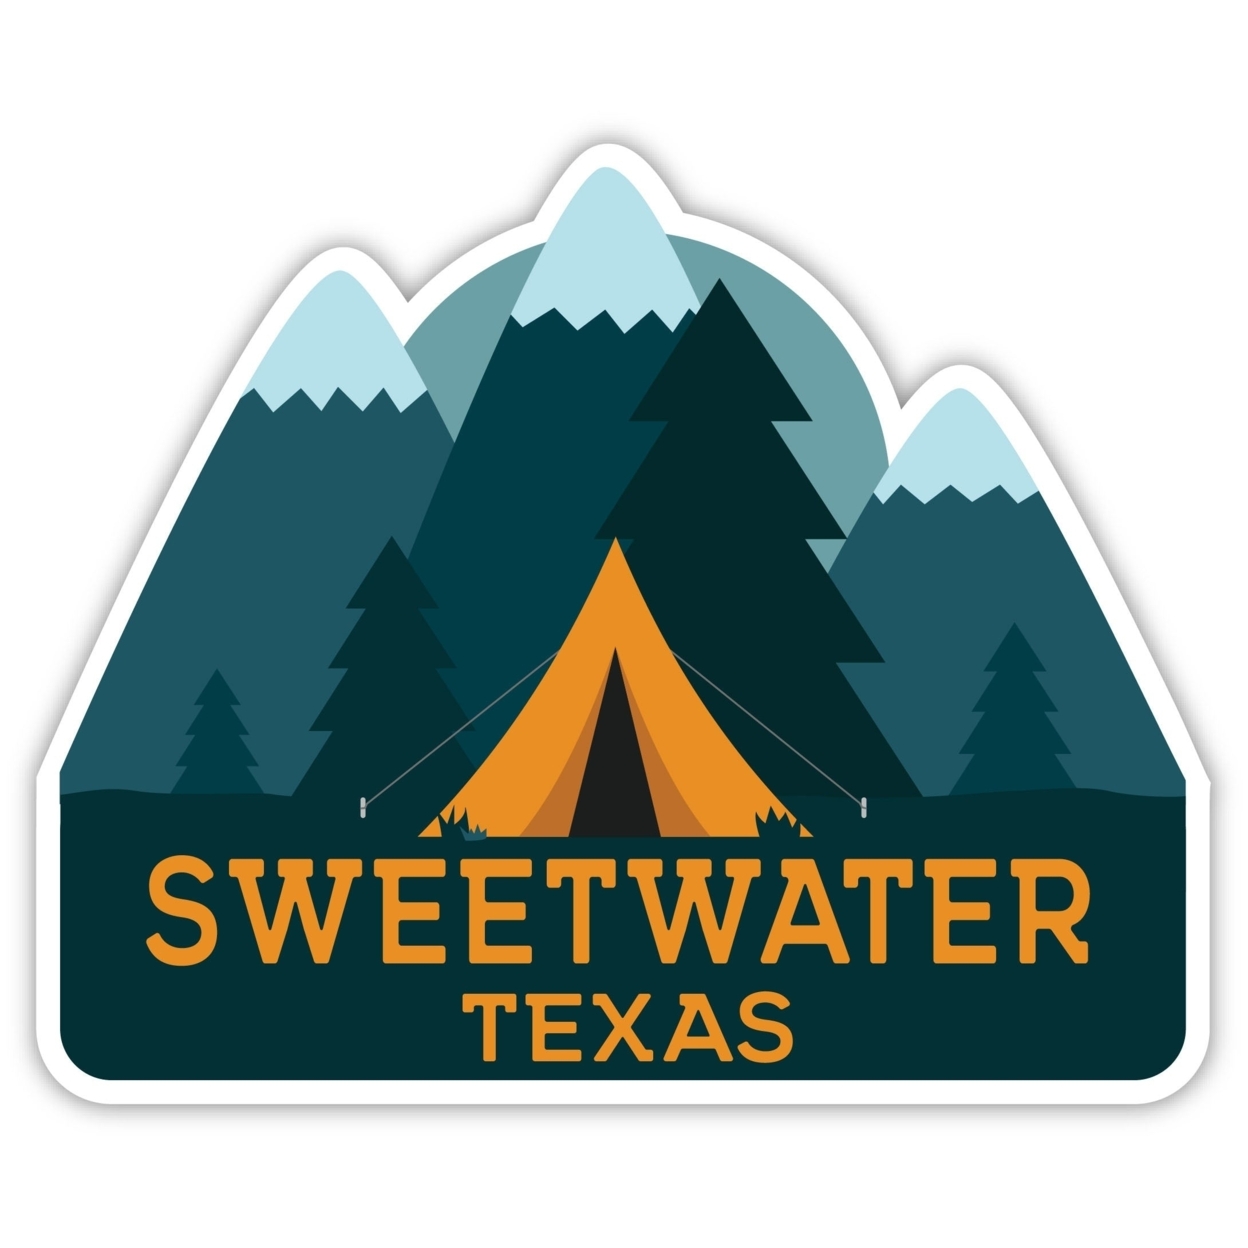 Sweetwater Texas Souvenir Decorative Stickers (Choose Theme And Size) - Single Unit, 4-Inch, Bear